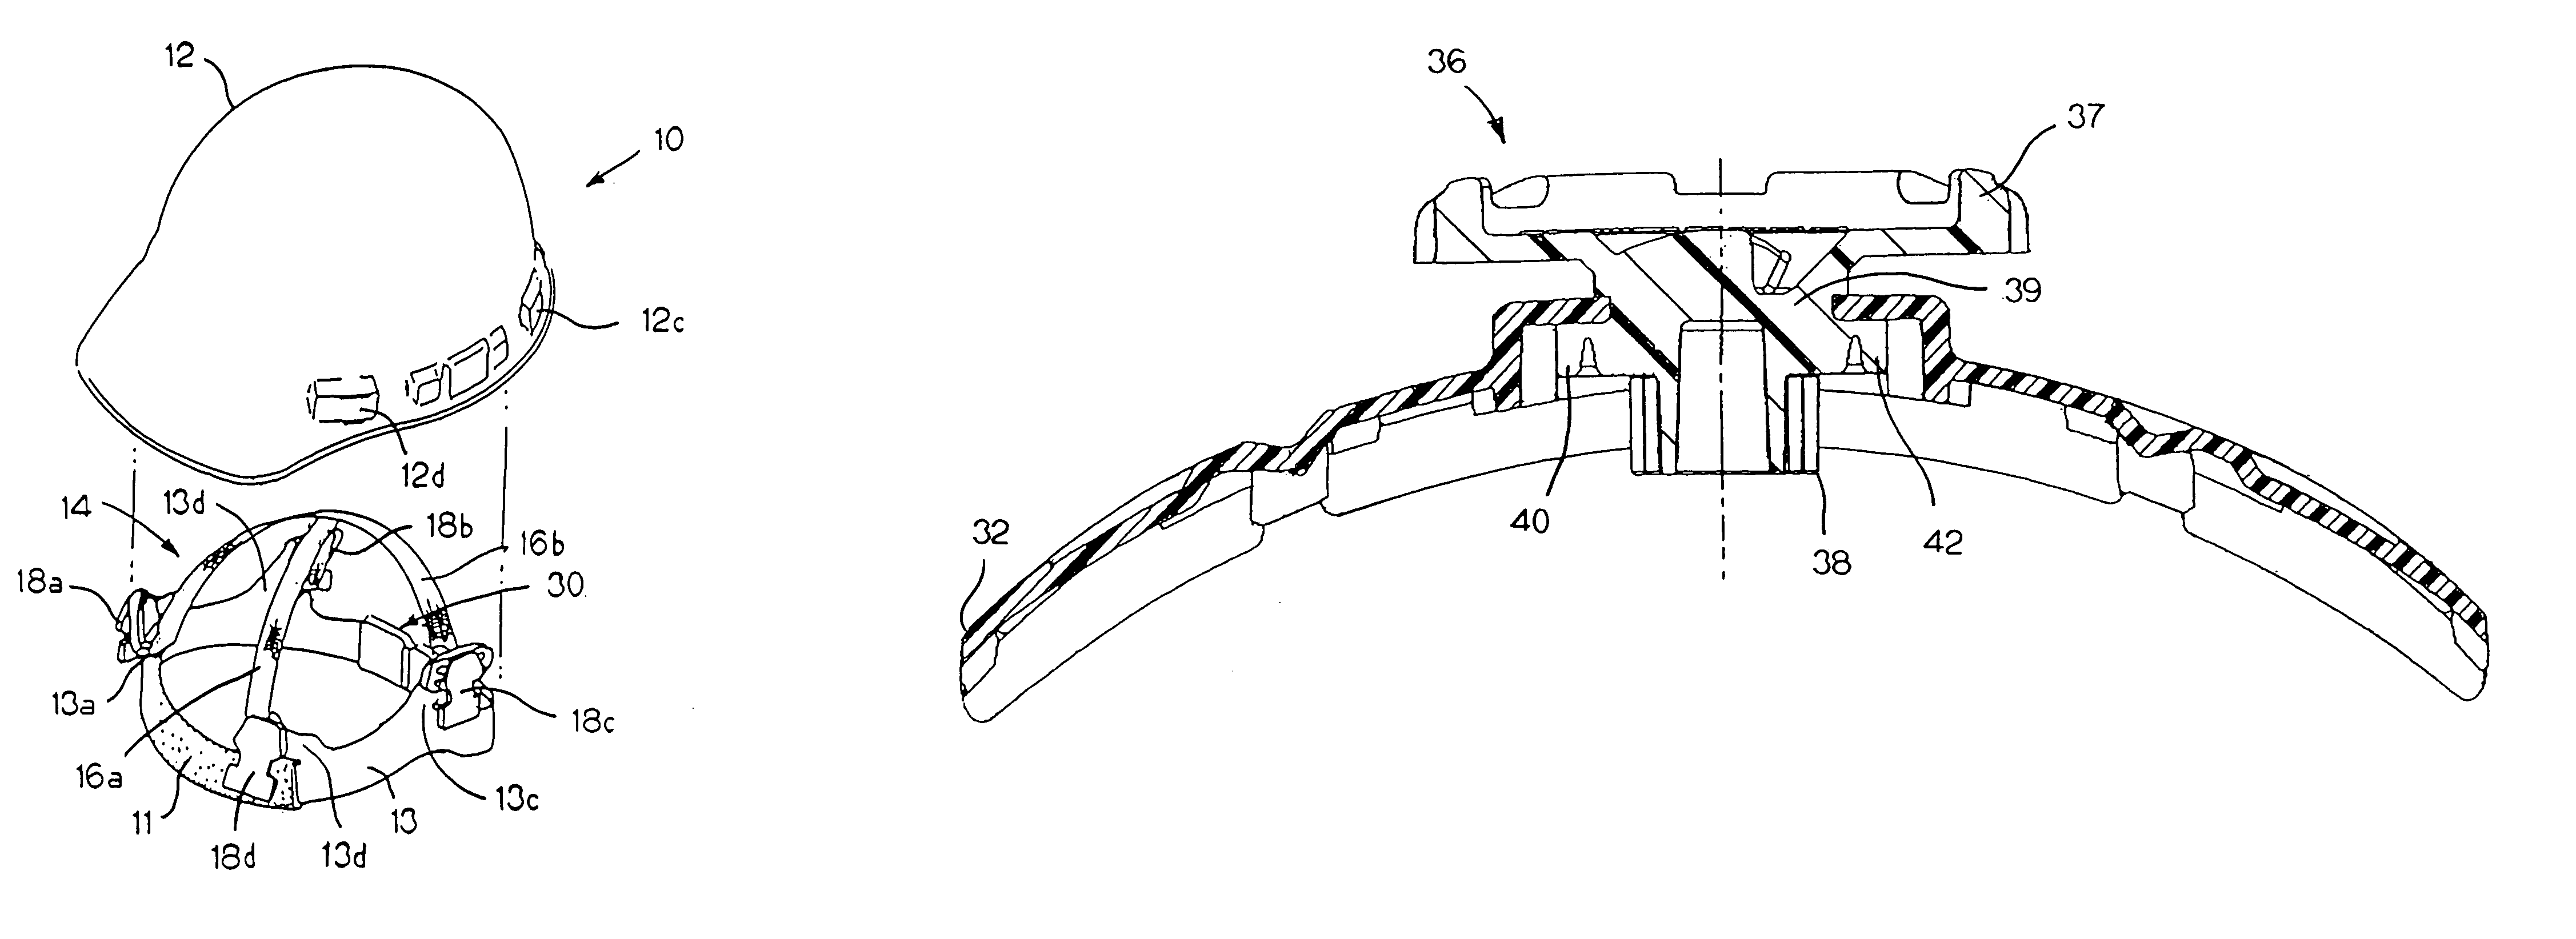 Ratchet mechanism with unitary knob and pinion construction